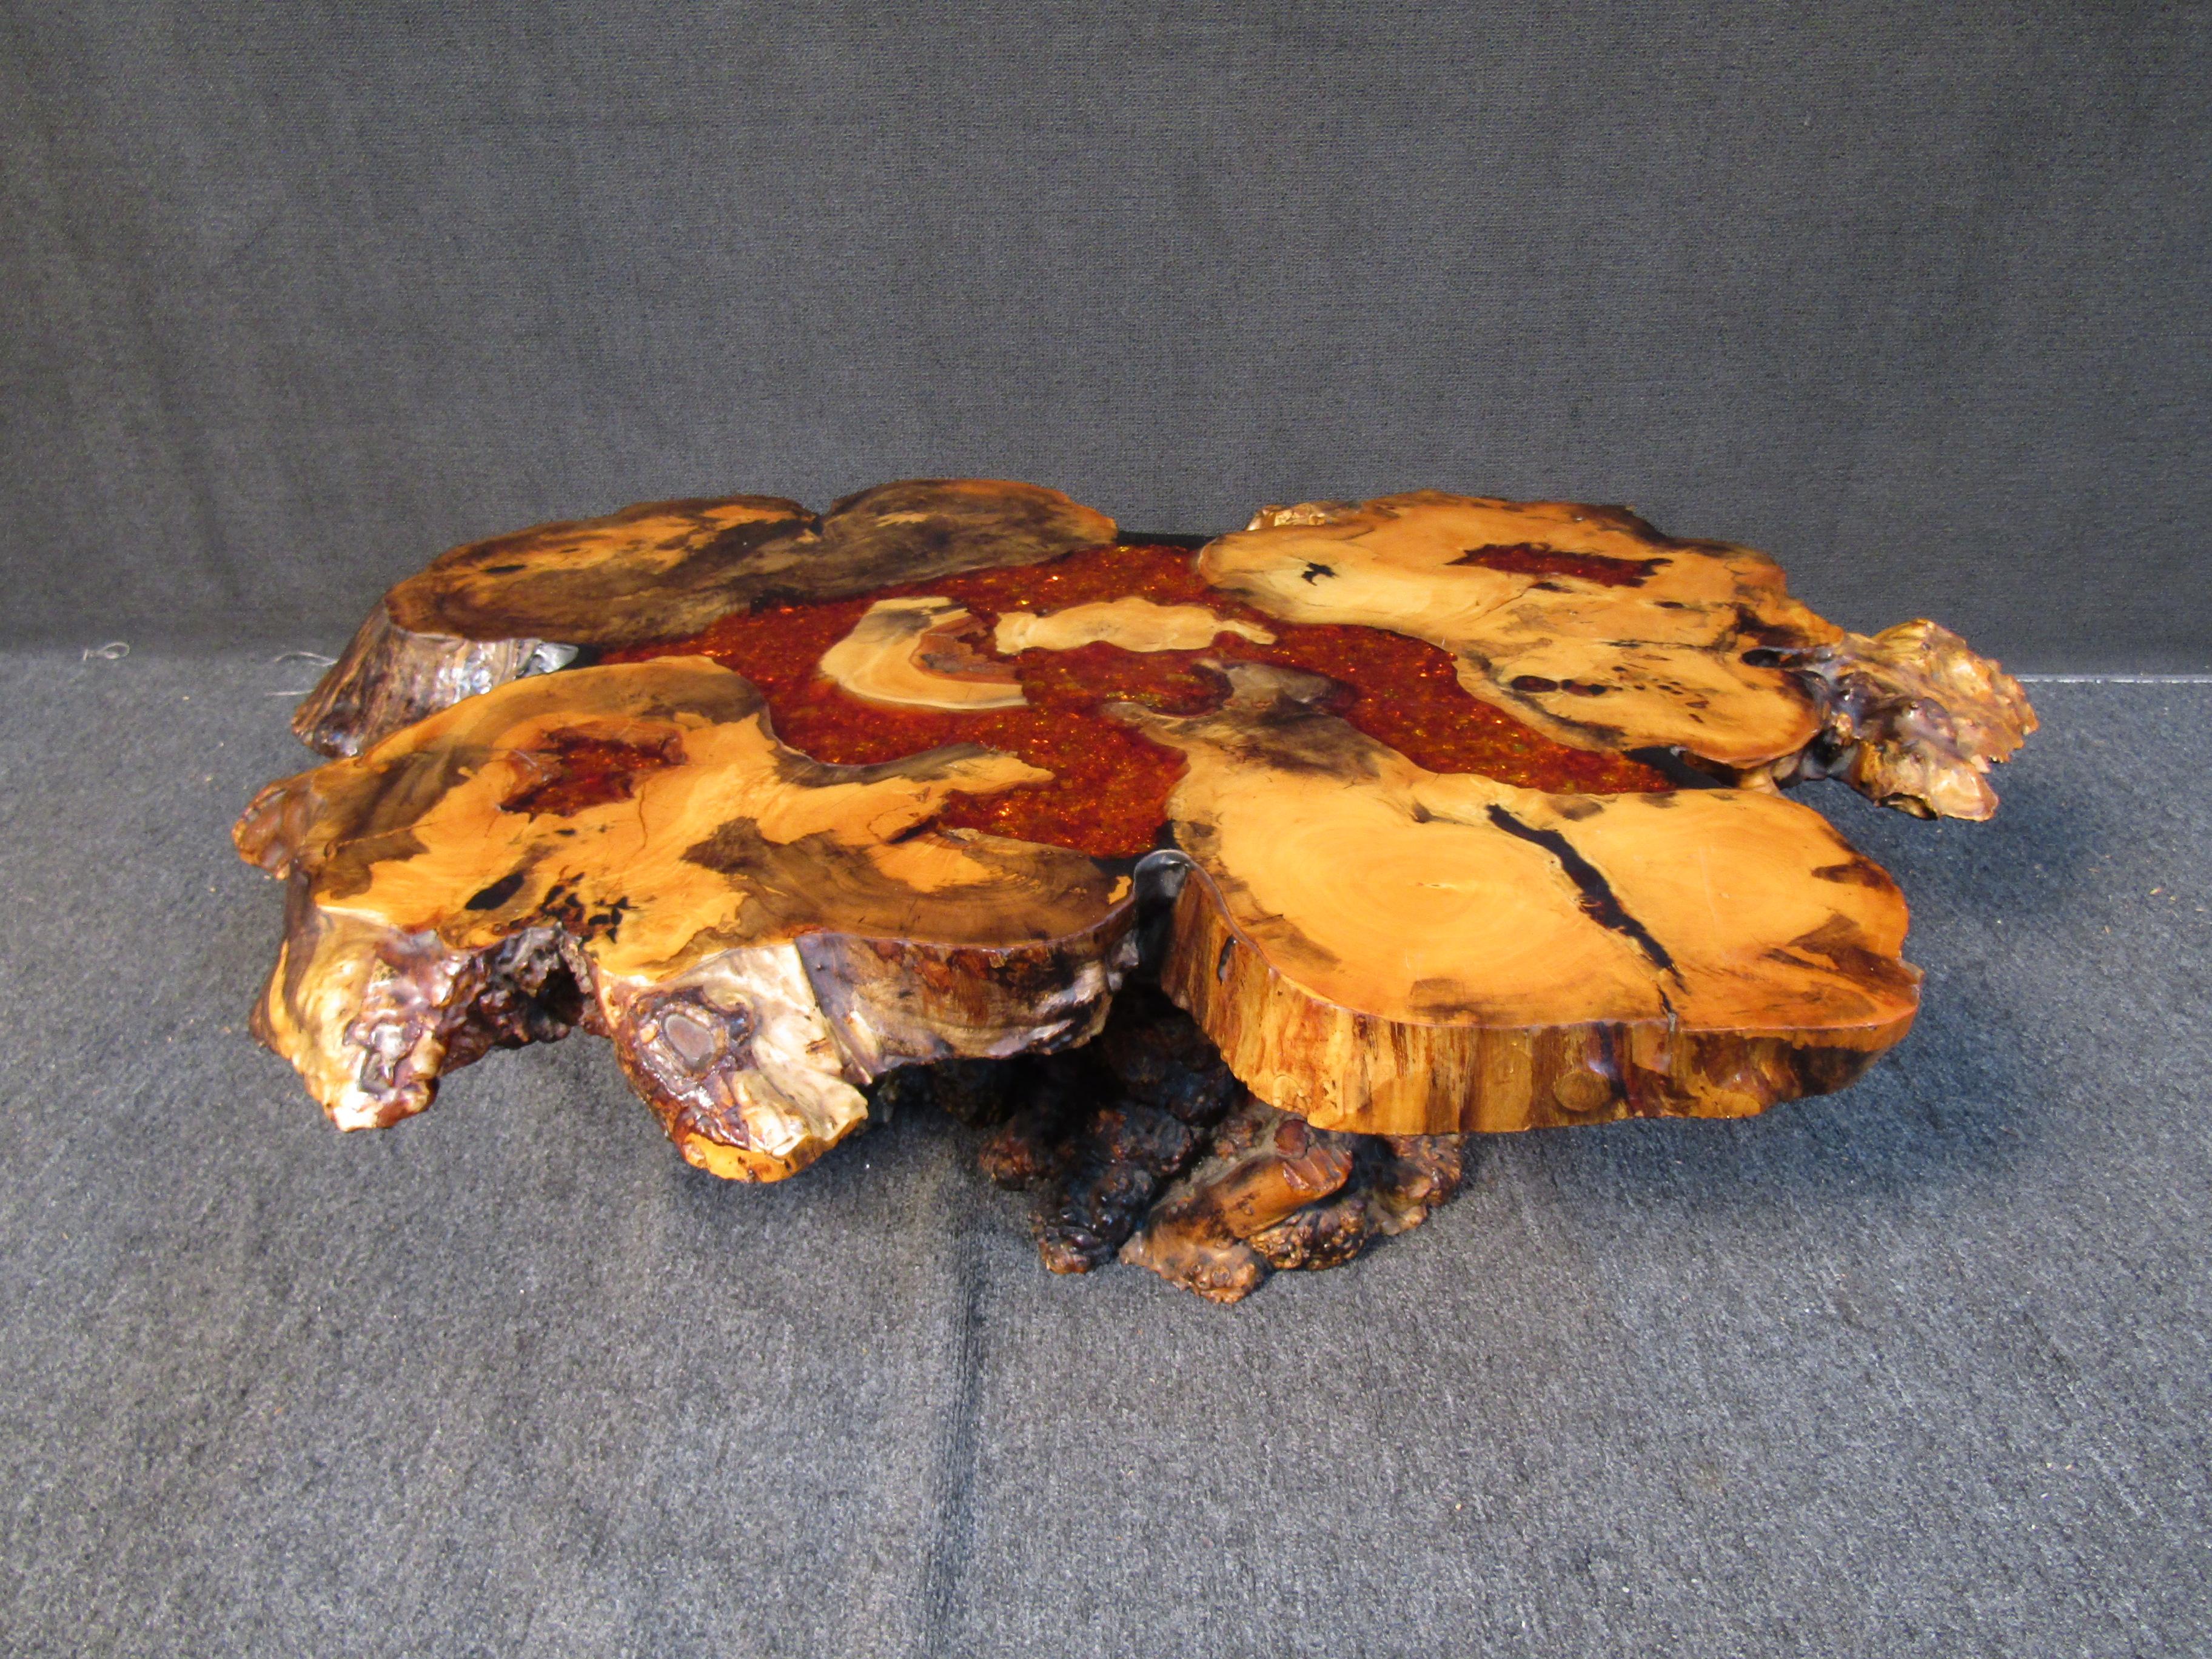 Beautifully figured live edge wood stump coffee table with a shining garnet colored resin filler. Please confirm item location with seller (NY/NJ).